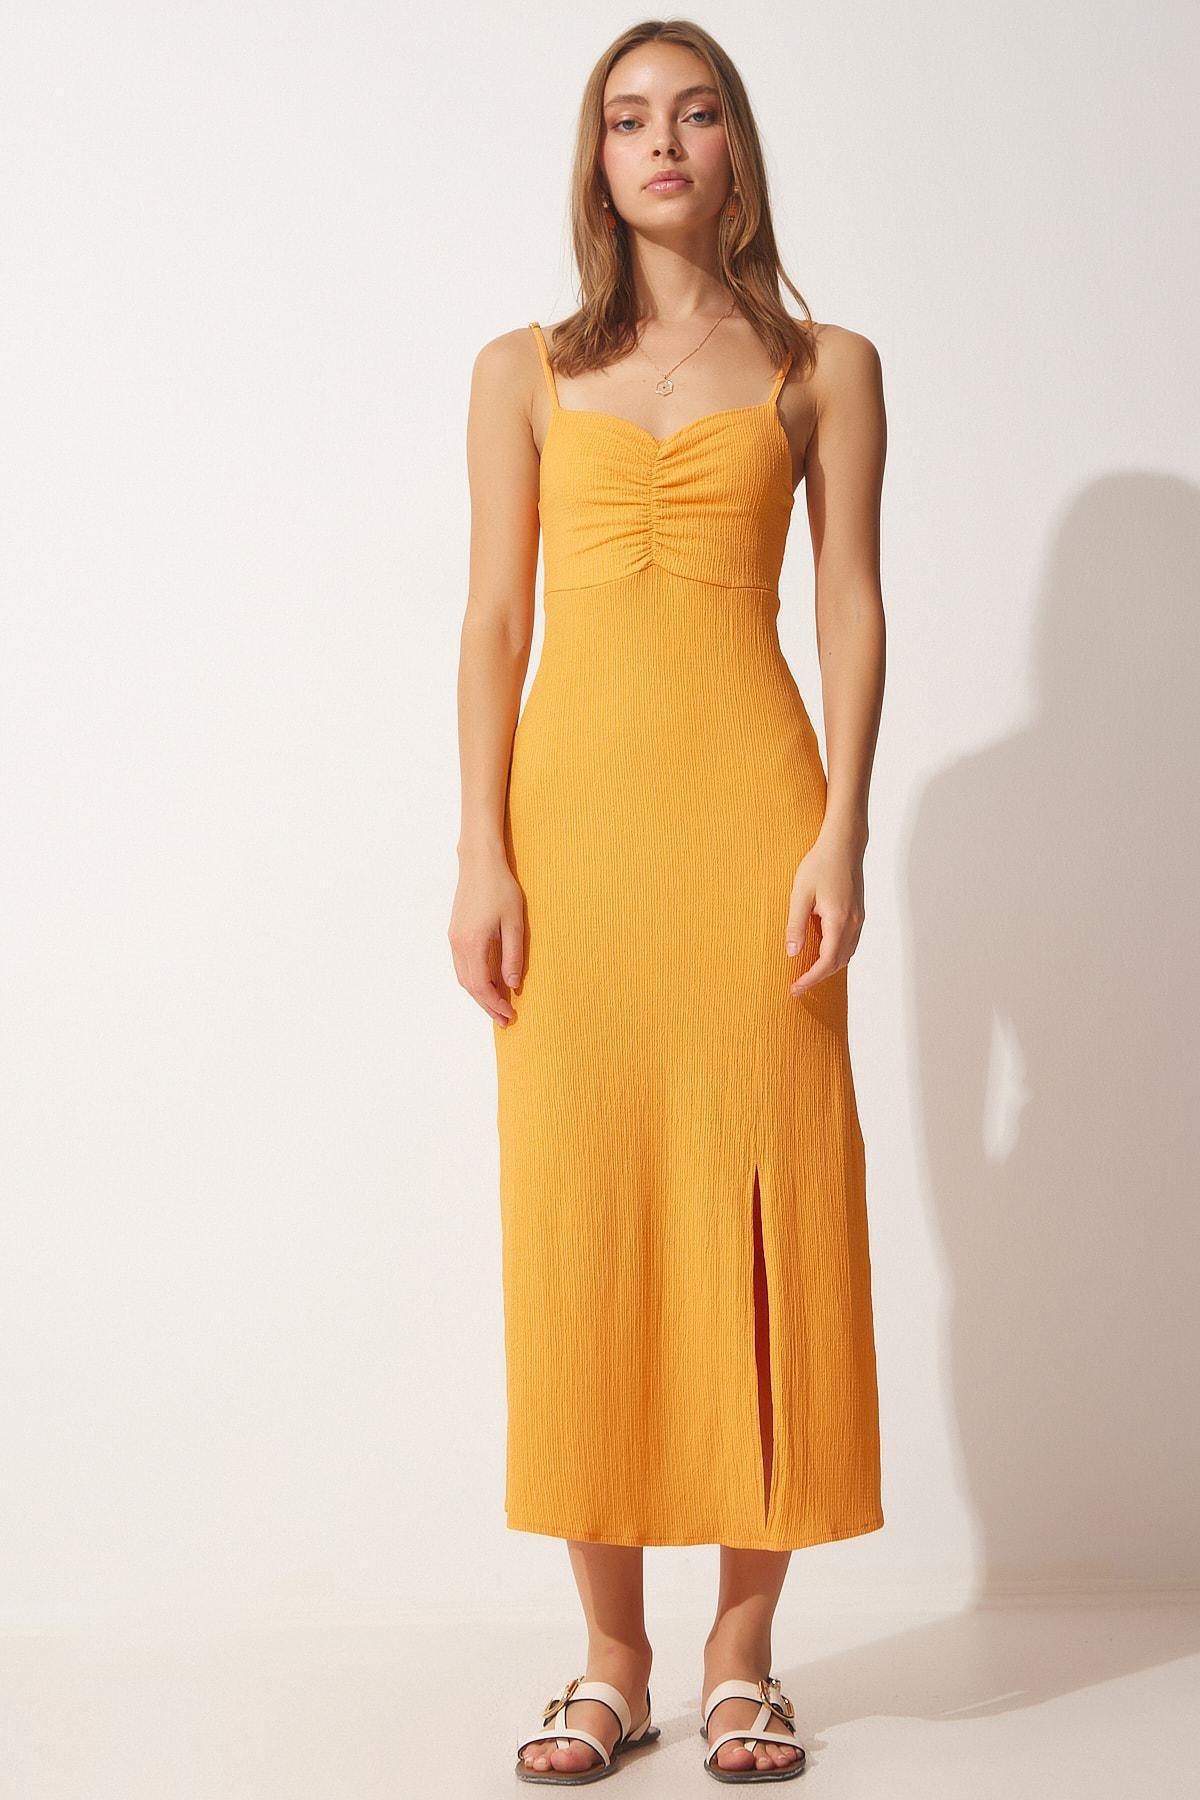 Happiness Istanbul - Orange Strap Slit Summer Knitted Dress